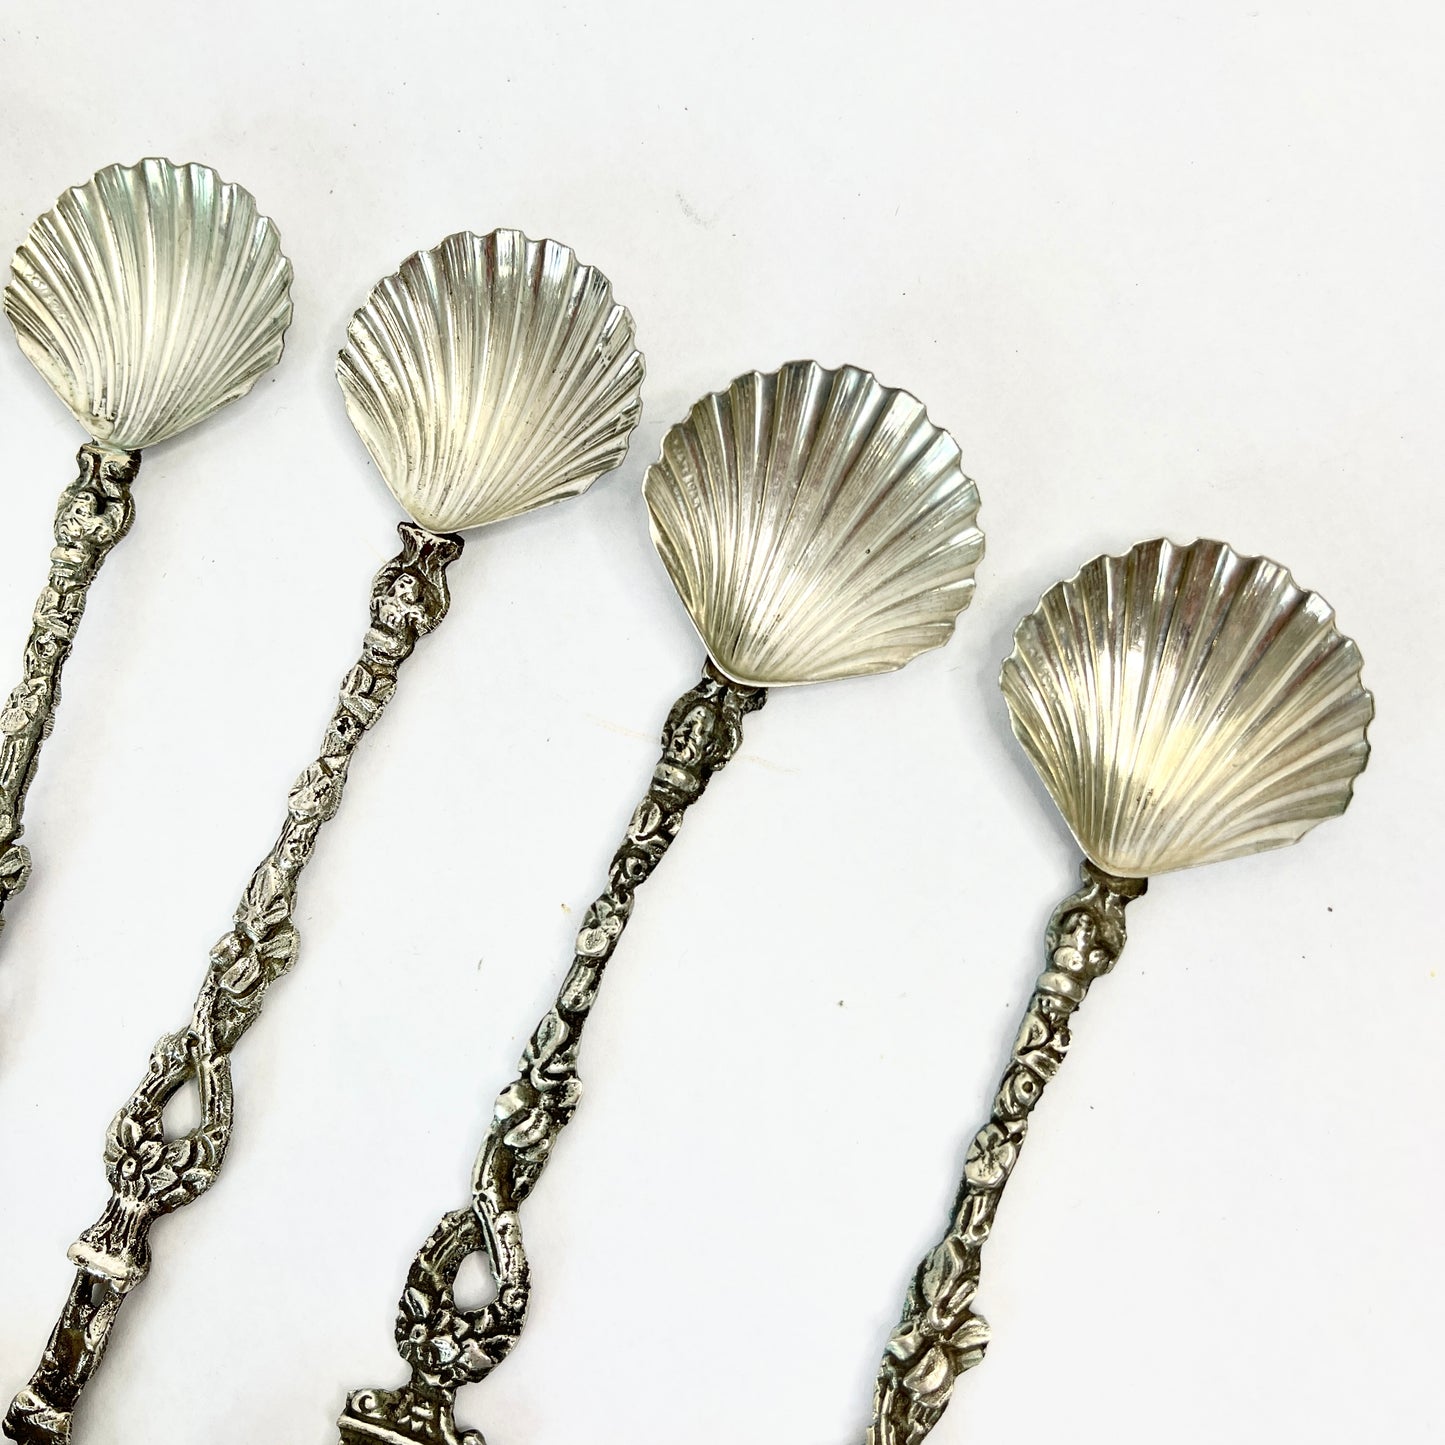 Vintage Silver Shell Spoons - Made in Italy - Price is for One Spoon